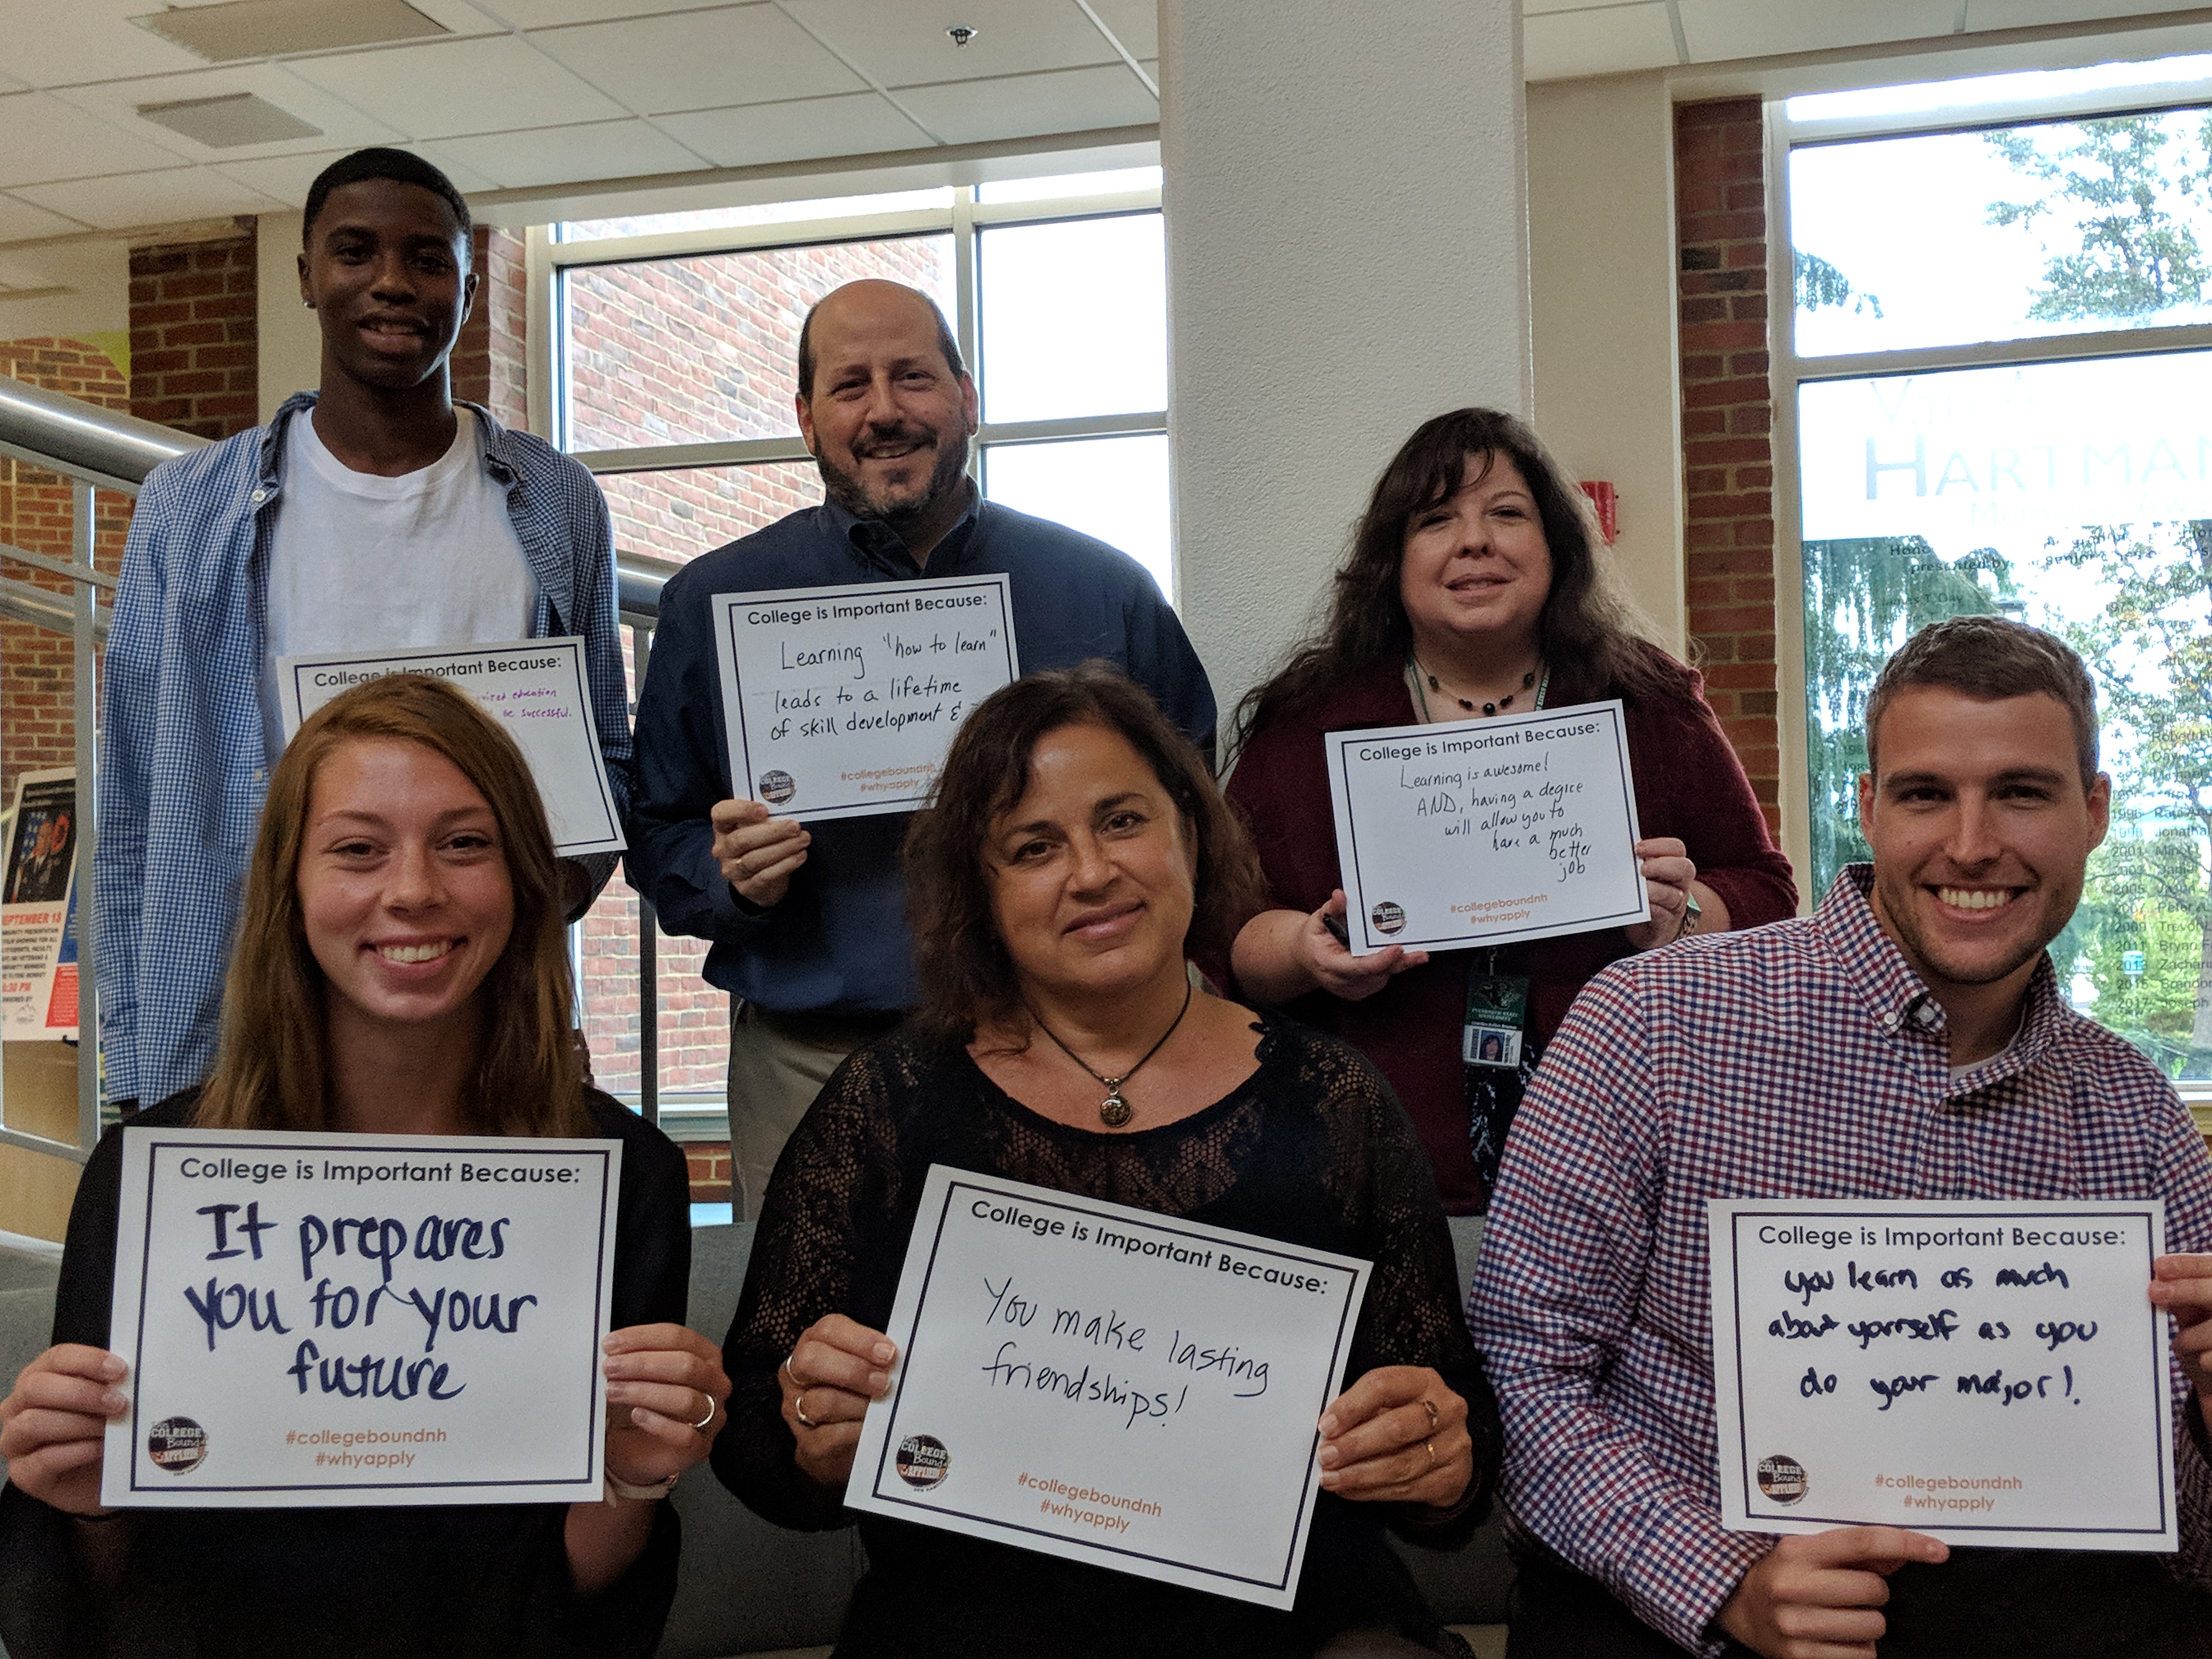 This year, PSU participated in the national #WhyApply Day.